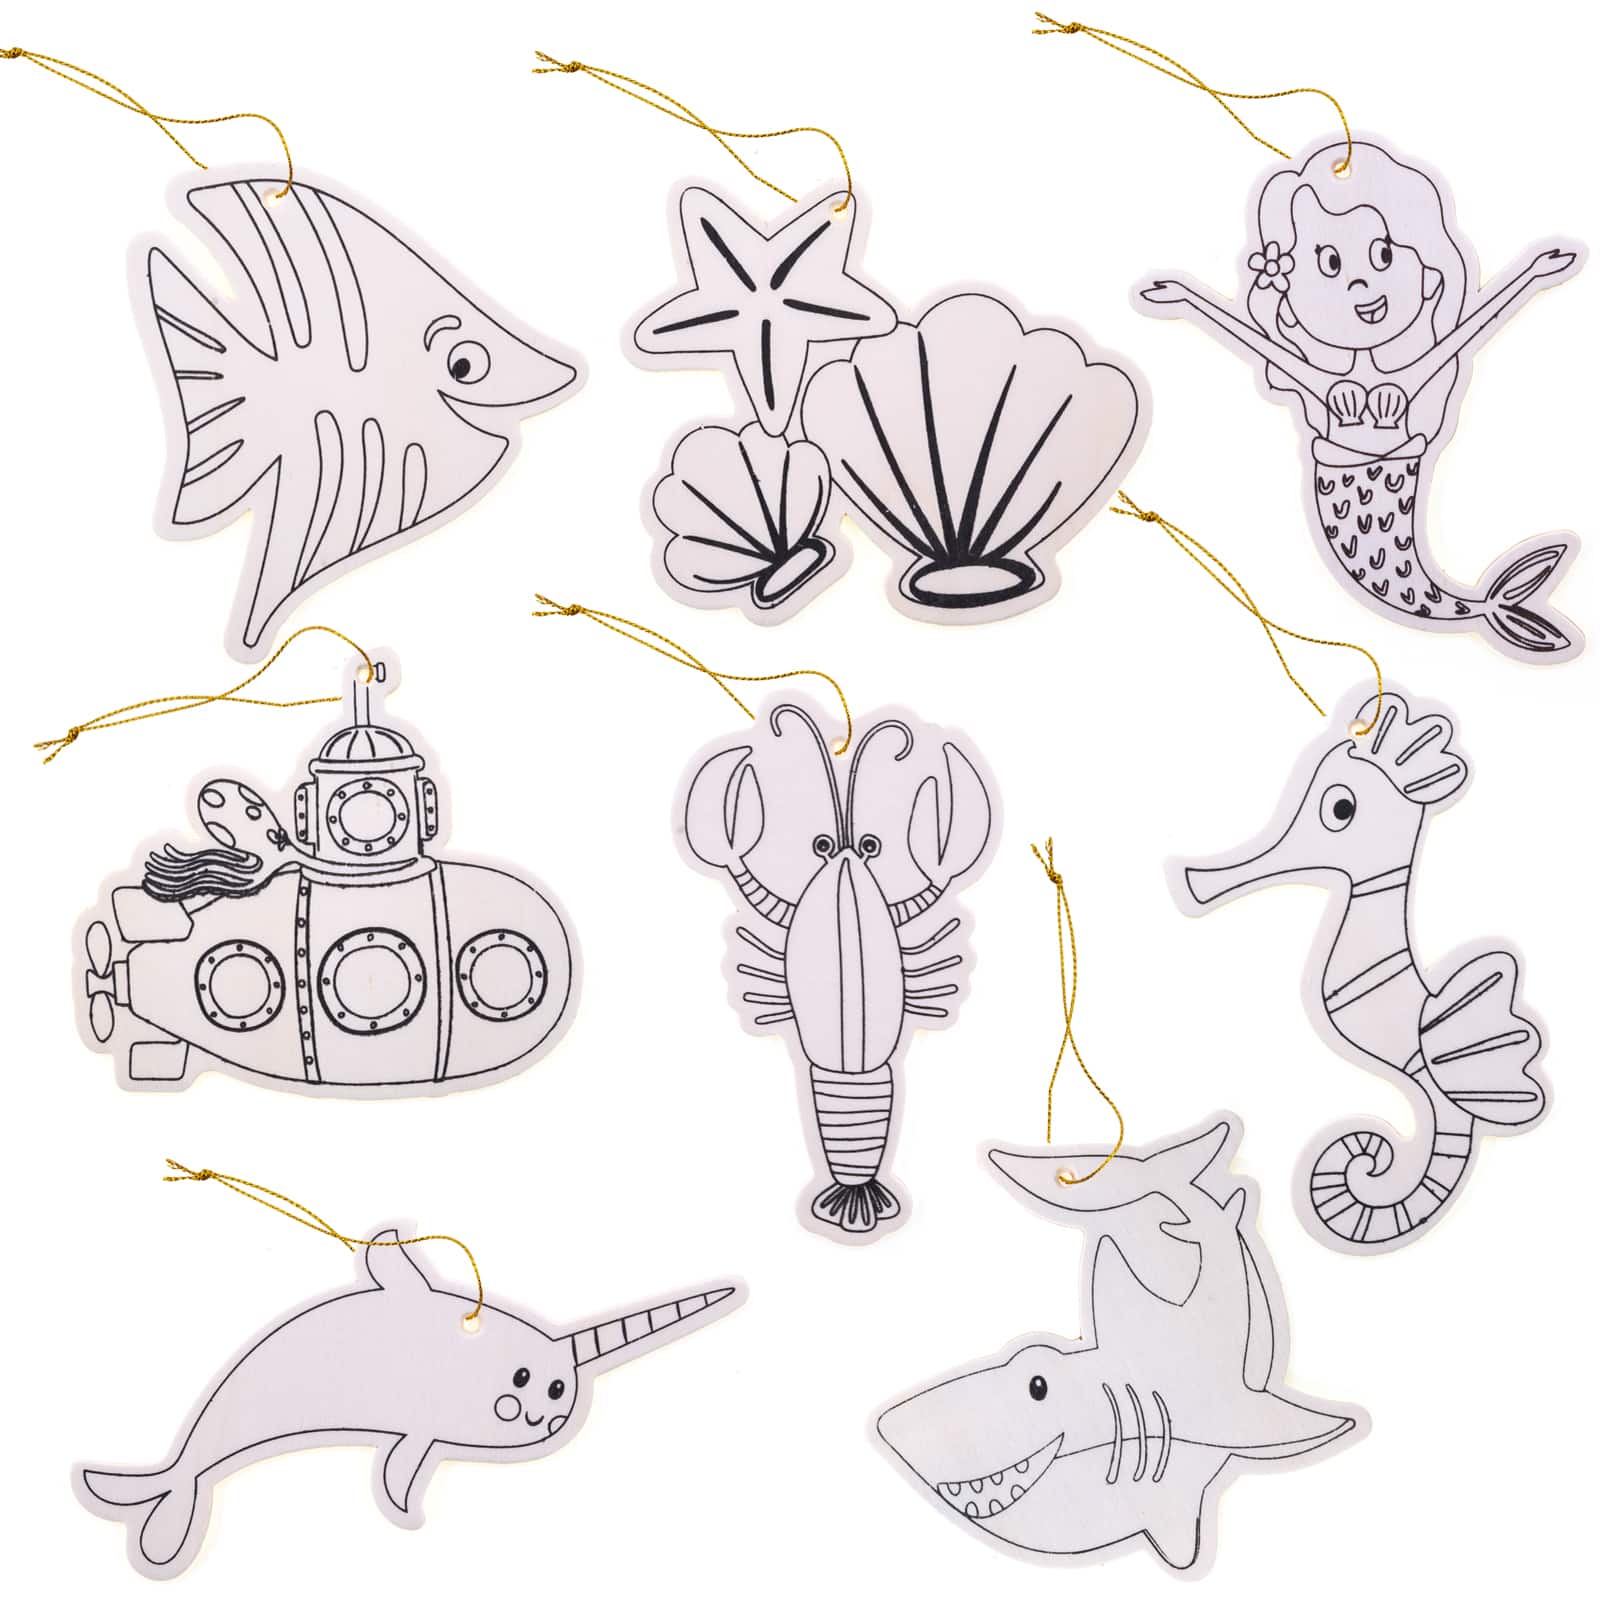 12 Packs: 8 ct. (96 total) Sealife Color-In Wood Ornaments by Creatology&#x2122;